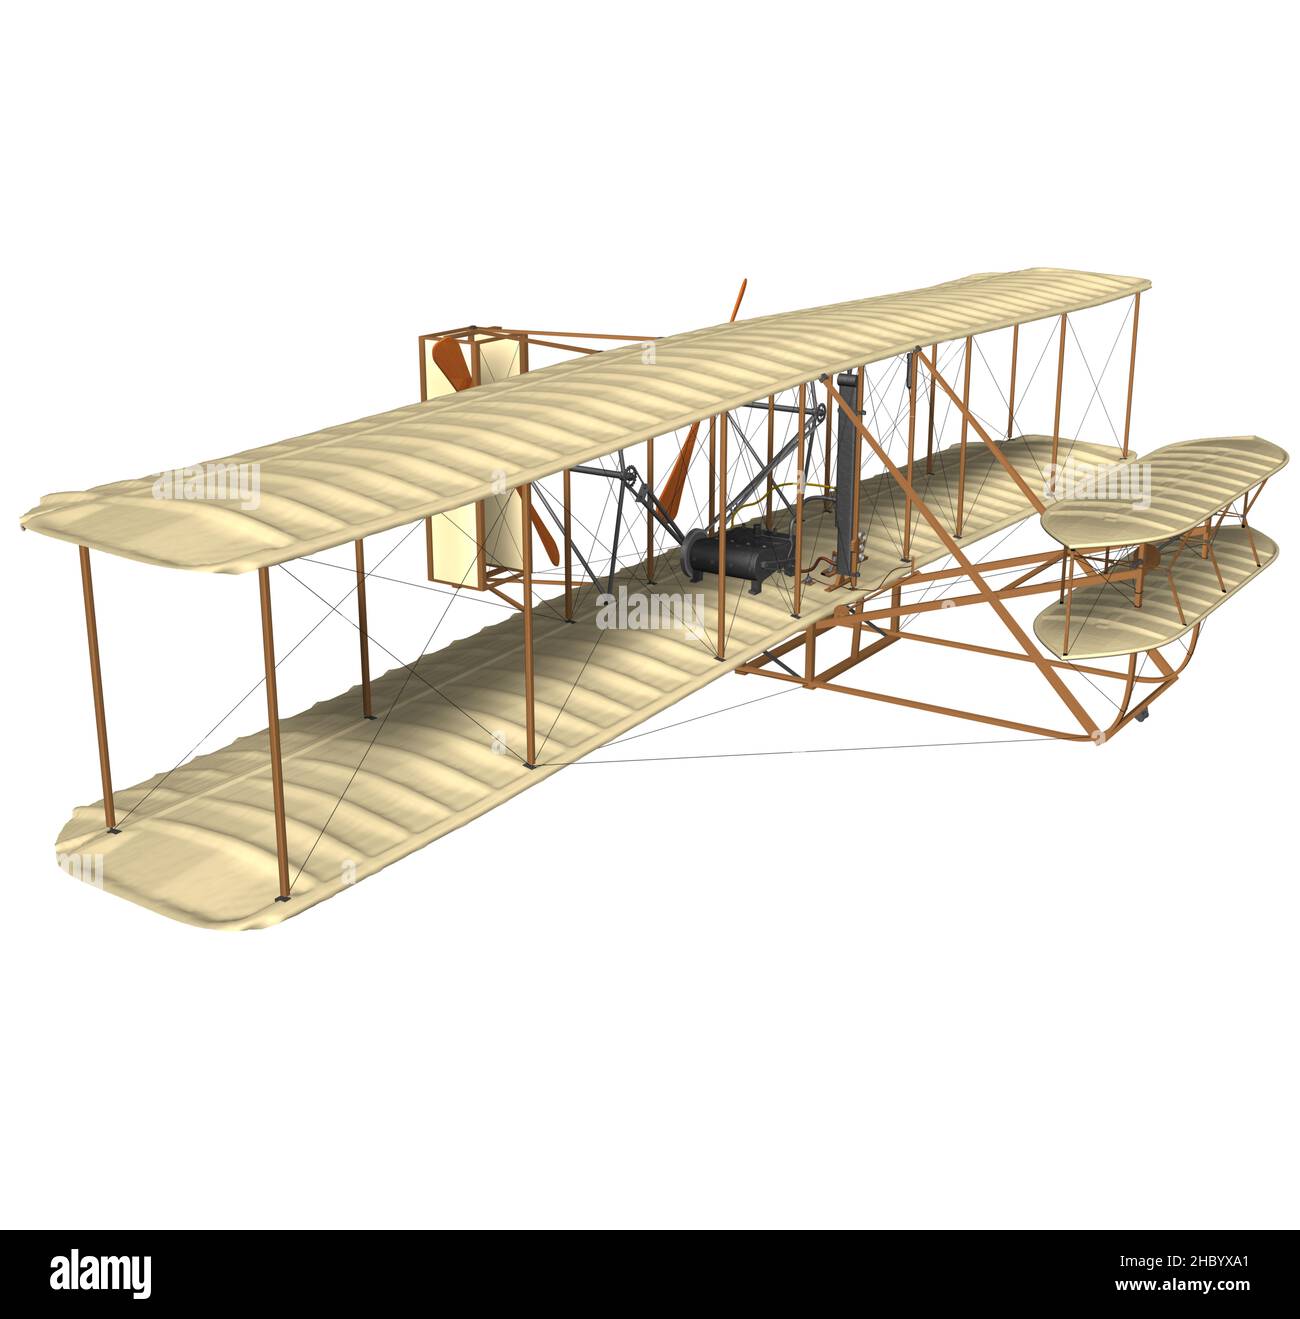 3D rendering illustration of the fist airplane (Flyer I) built and tested by Orville and Wilbur Wright on December 17 of 1903. Stock Photo